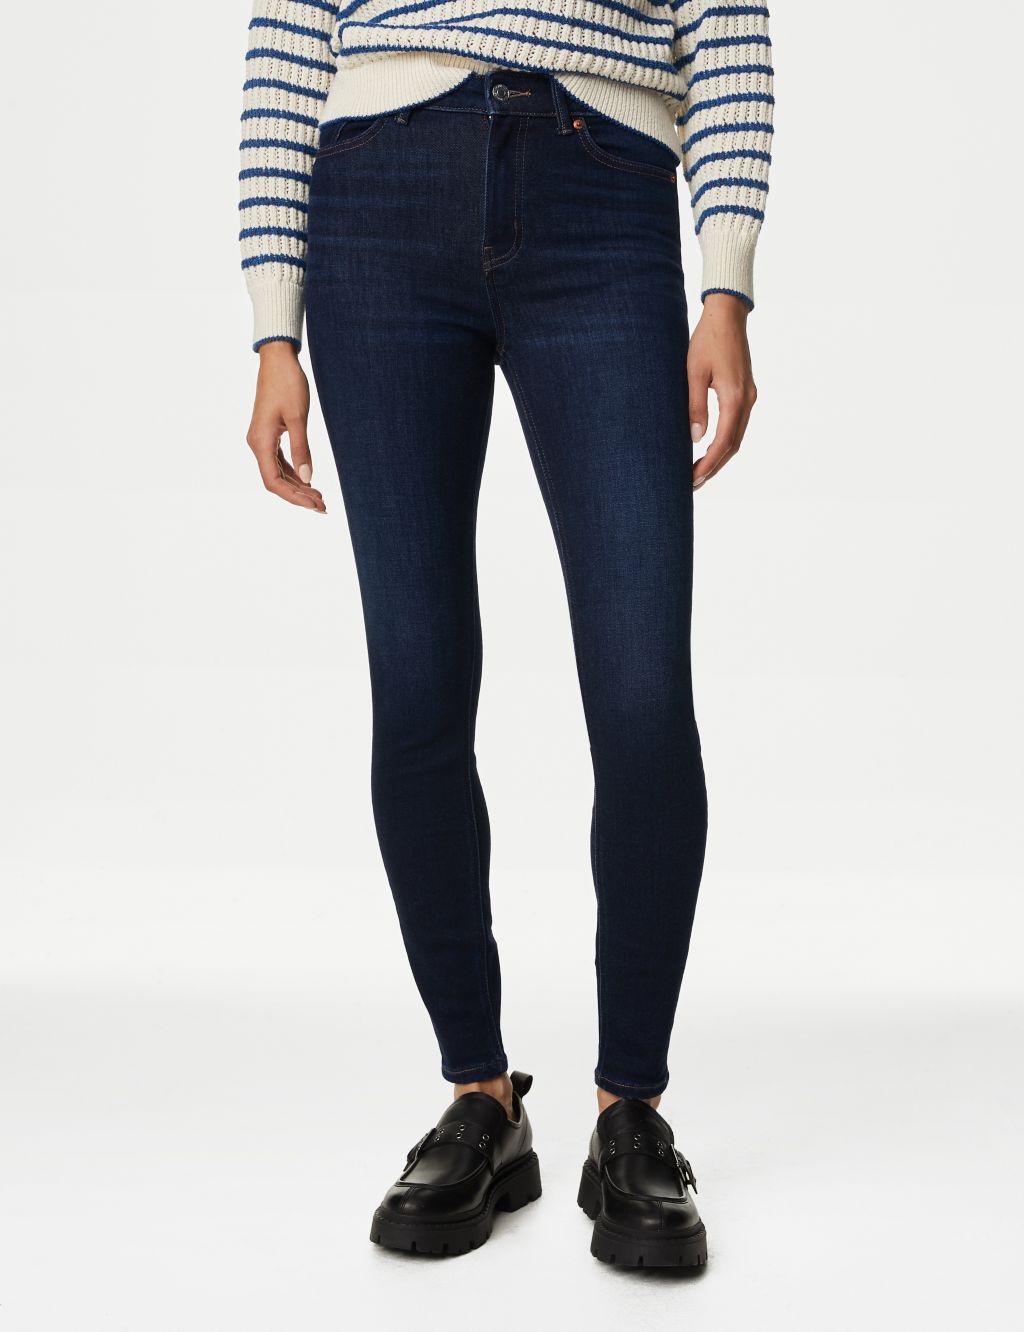 Ivy Thermal High Waisted Skinny Jeans image 3